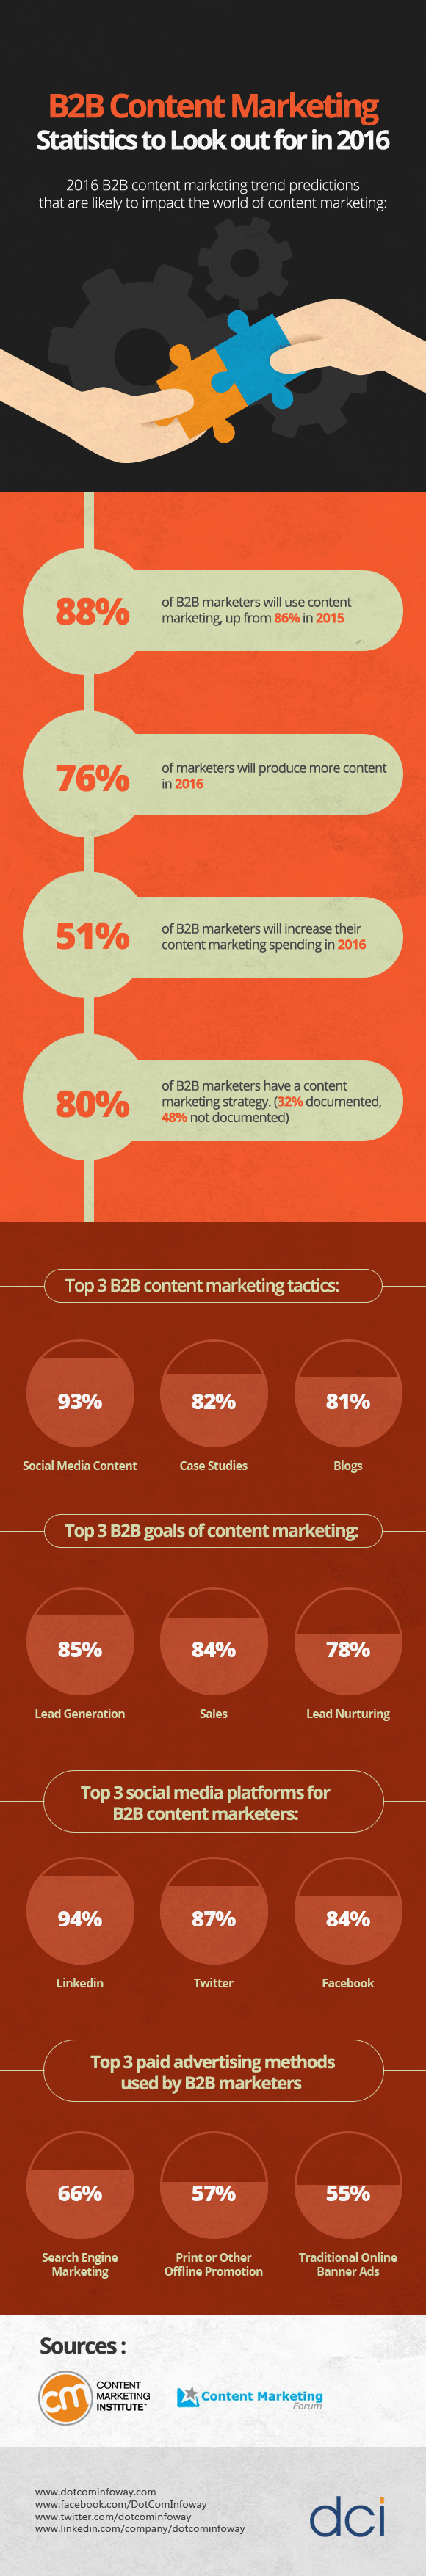 B2B Content Marketing Strategies to Look out for in 2016 Infographic